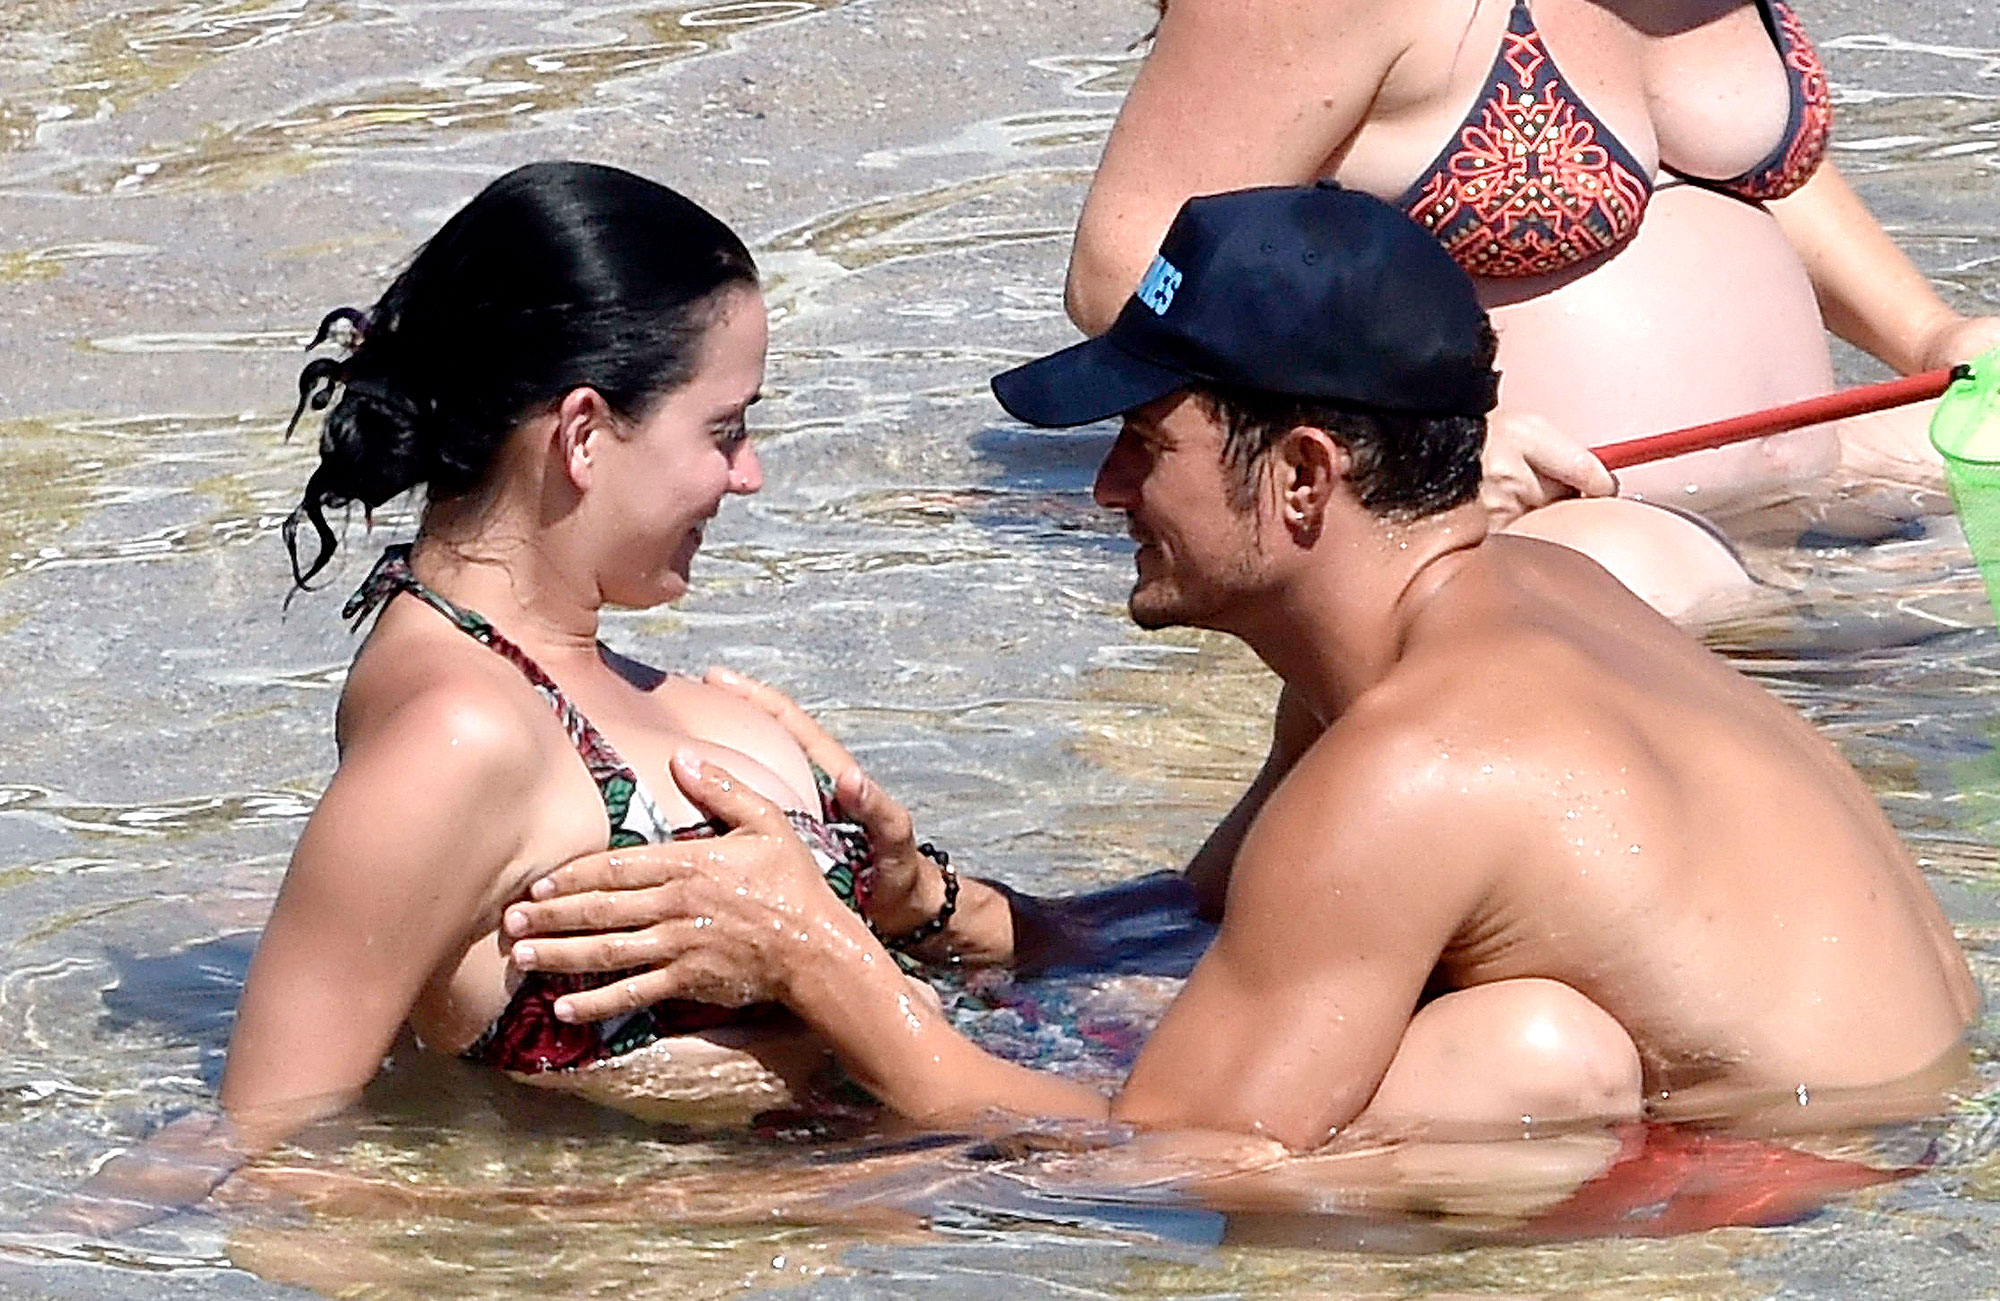 Orlando Bloom Grabs Katy Perrys Boobs During Beach Vacation